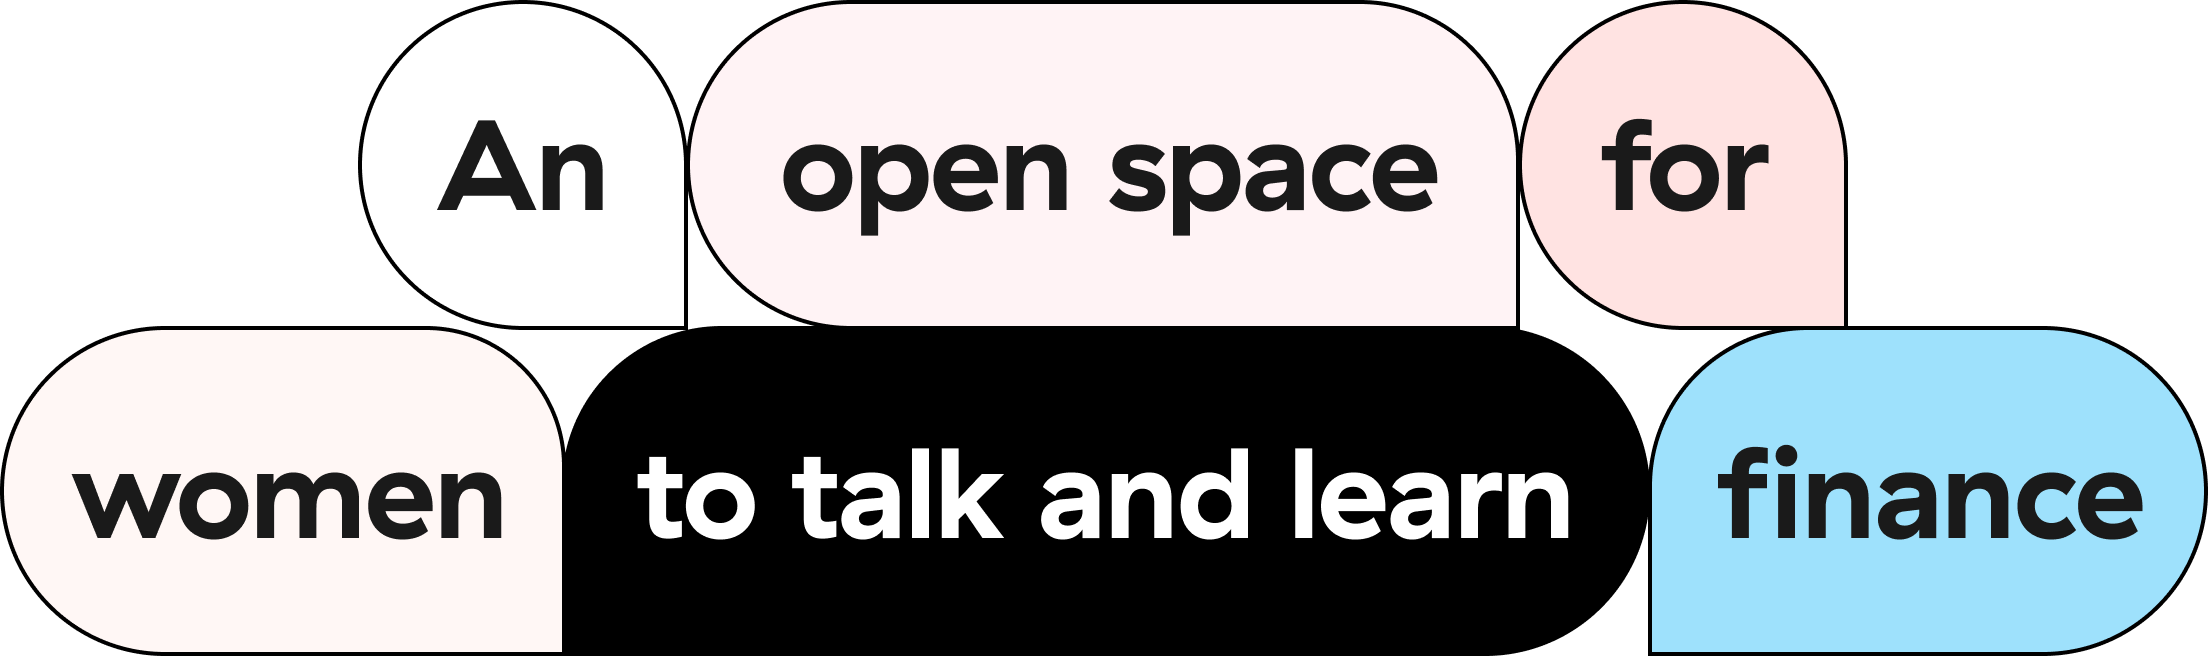 An open space for women to talk and learn finance